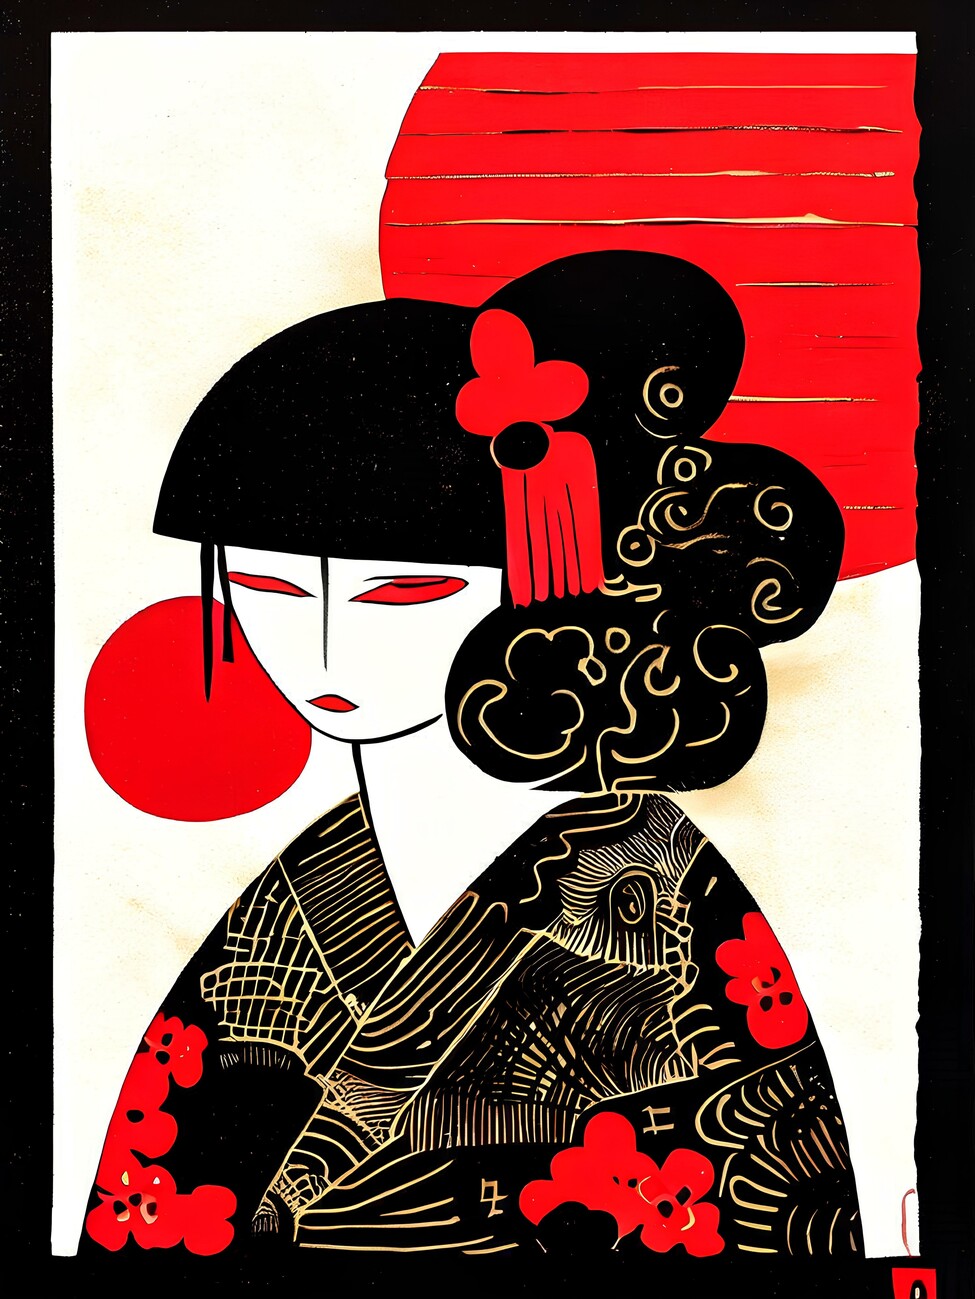 Traditional Japanese Woman. by Lnescuh on DeviantArt